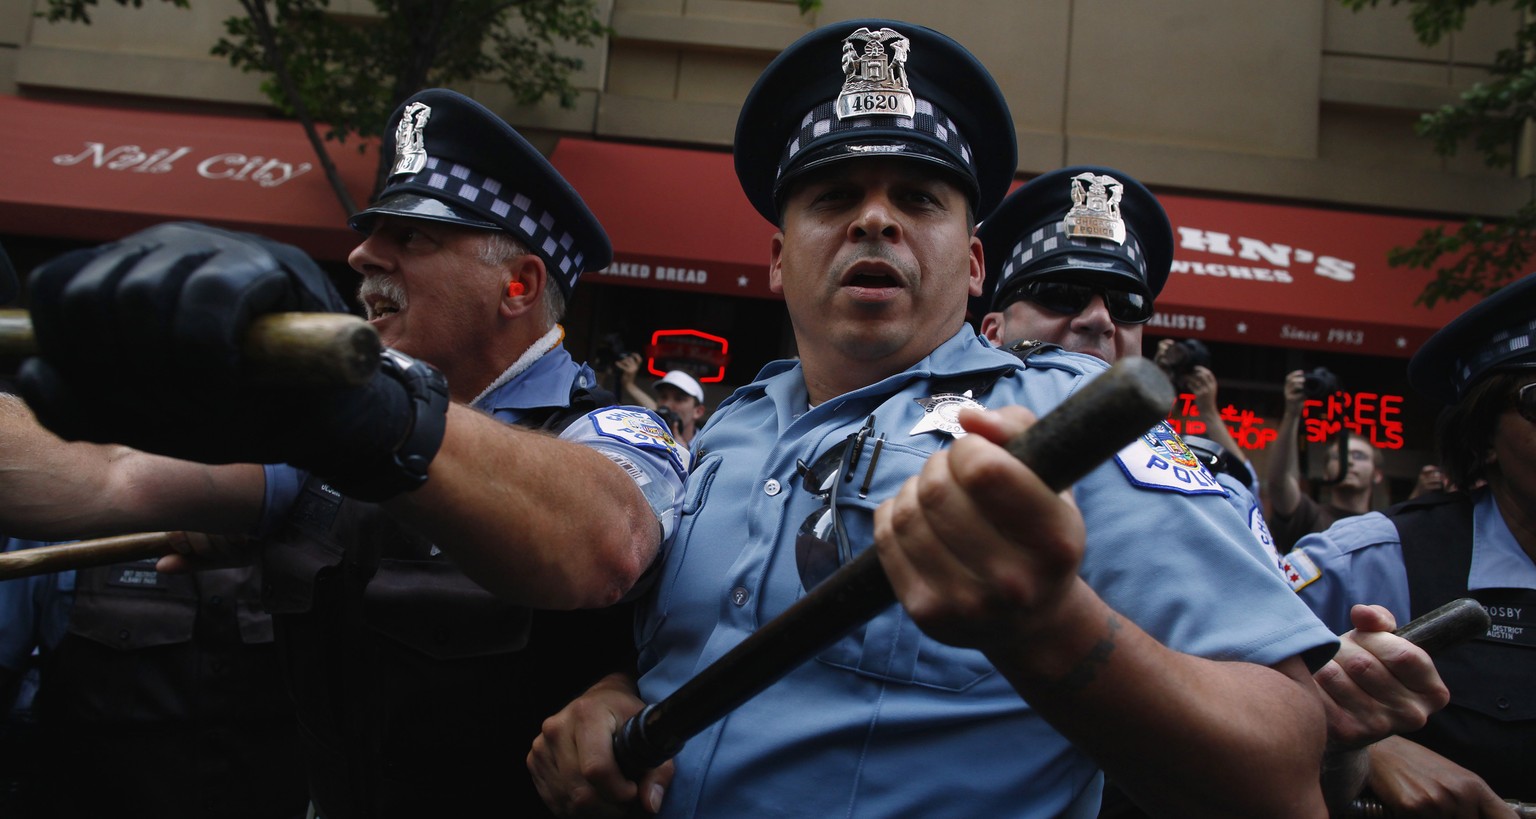 Police officers hold batons as demonstrators clash with the police during an anti-NATO protest march in Chicago May 20, 2012. Chicago police trying to keep the peace during the NATO summit may face th ...